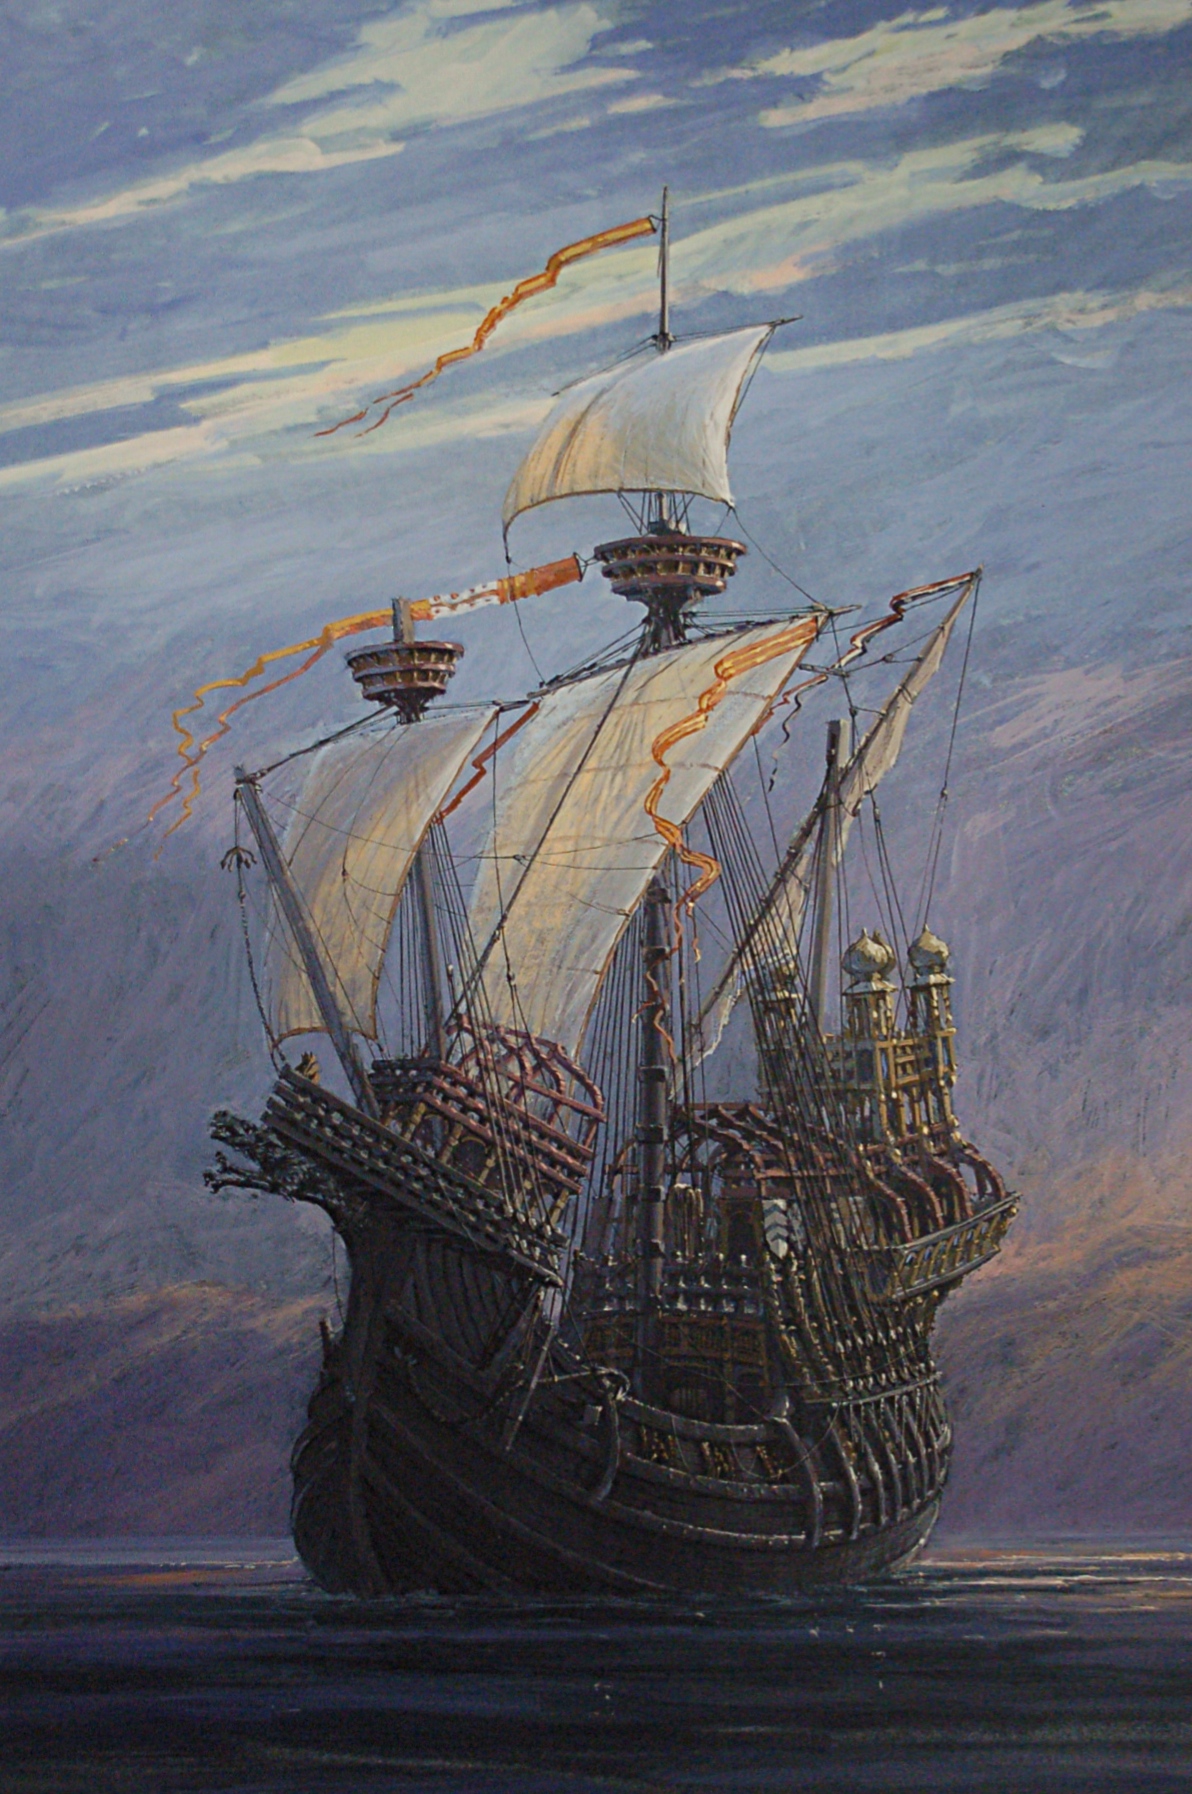 an artist's impression of the old sail ship